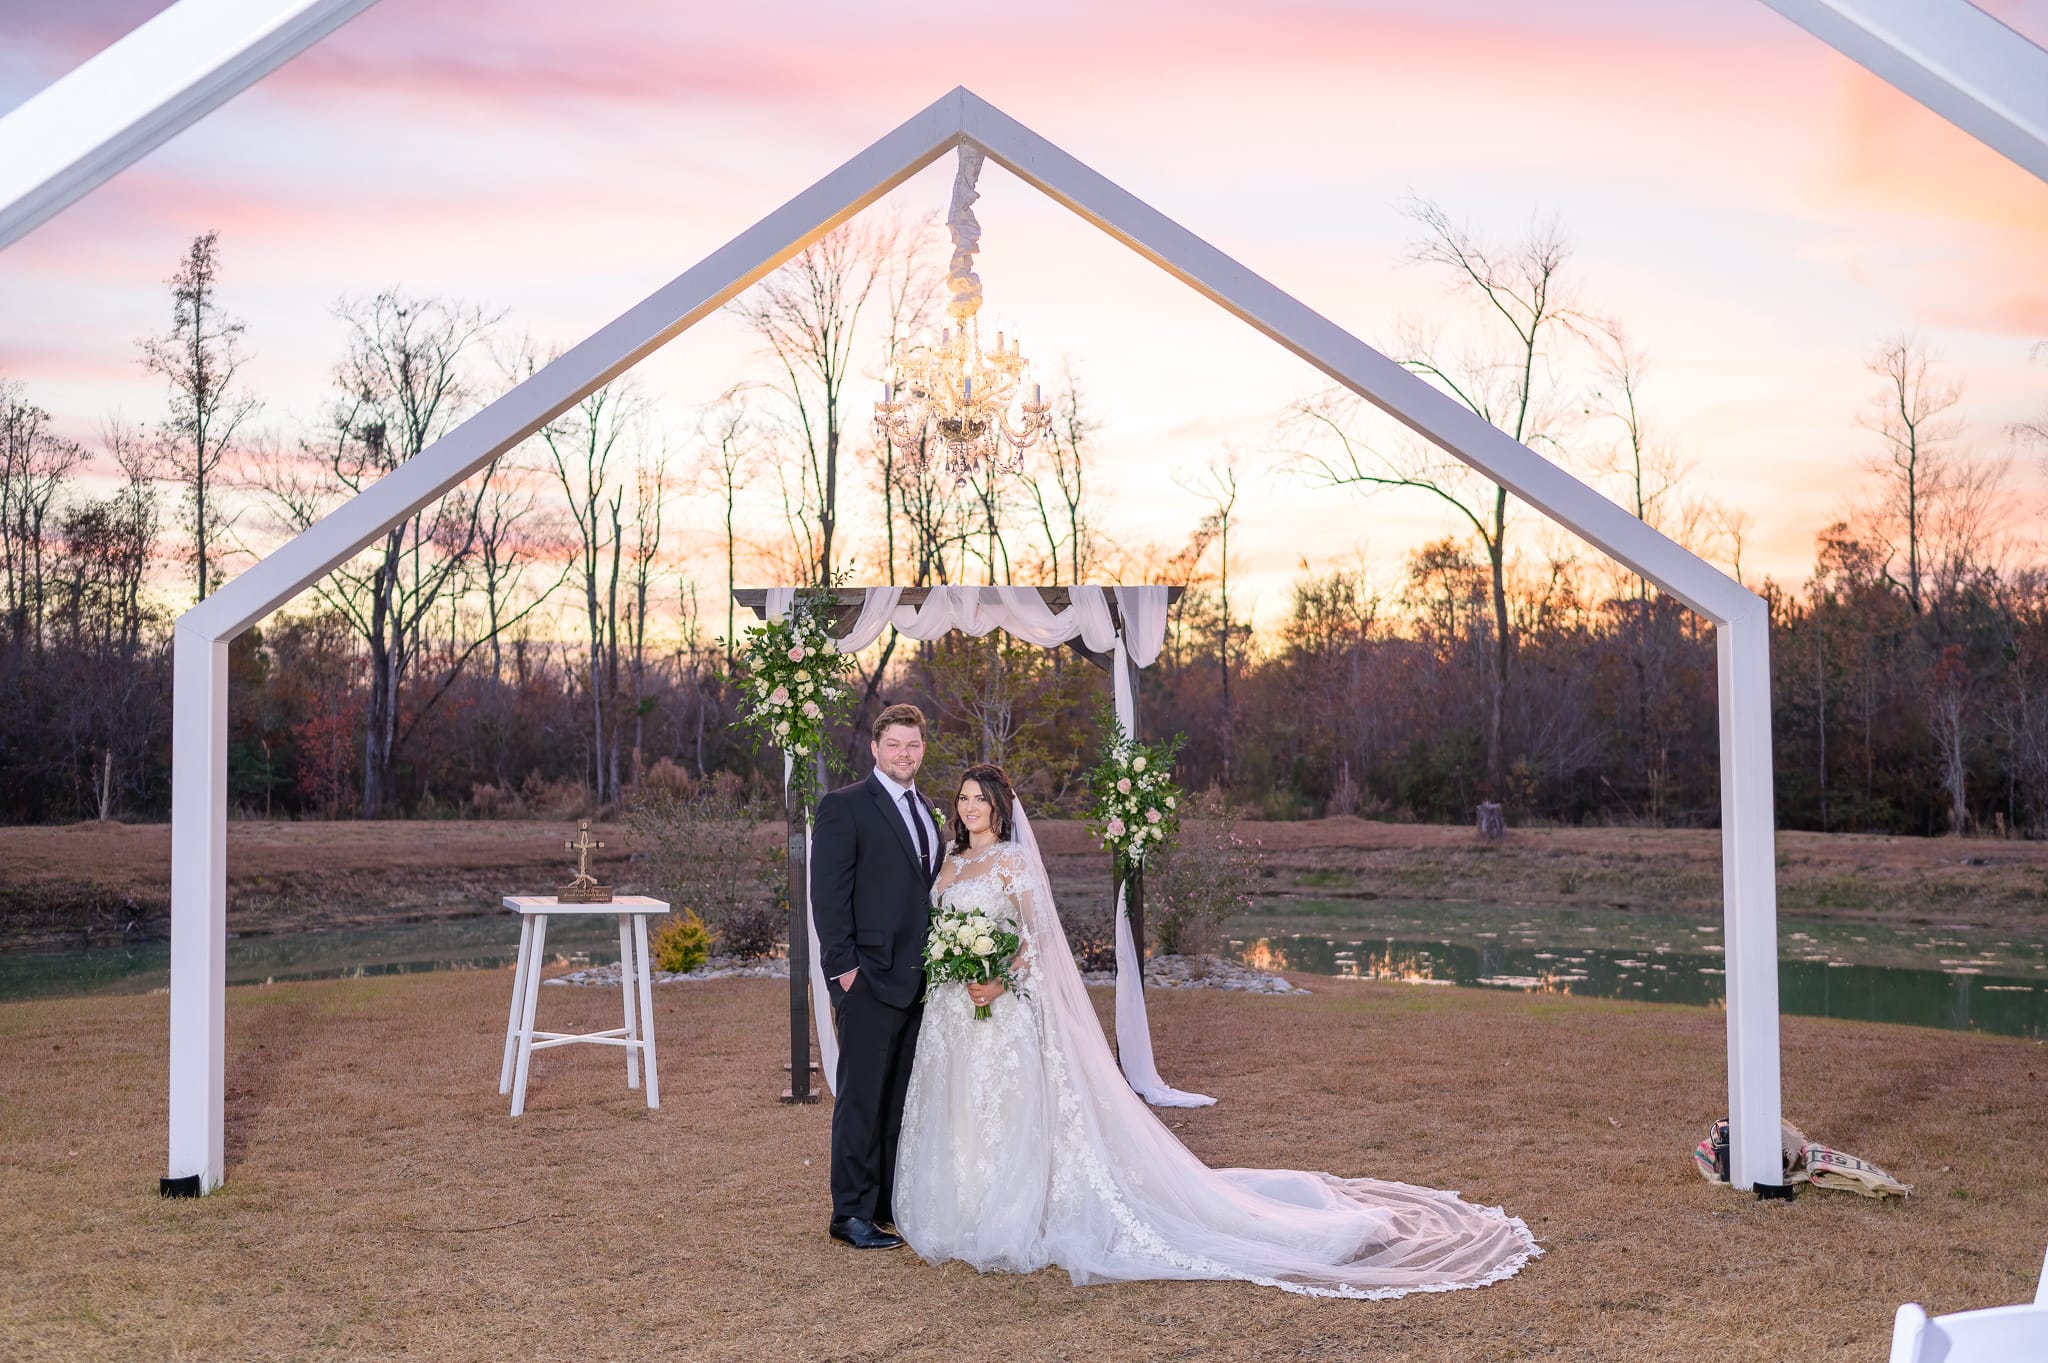 Sunset under the outdoor chandelier   - The Venue at White Oaks Farm